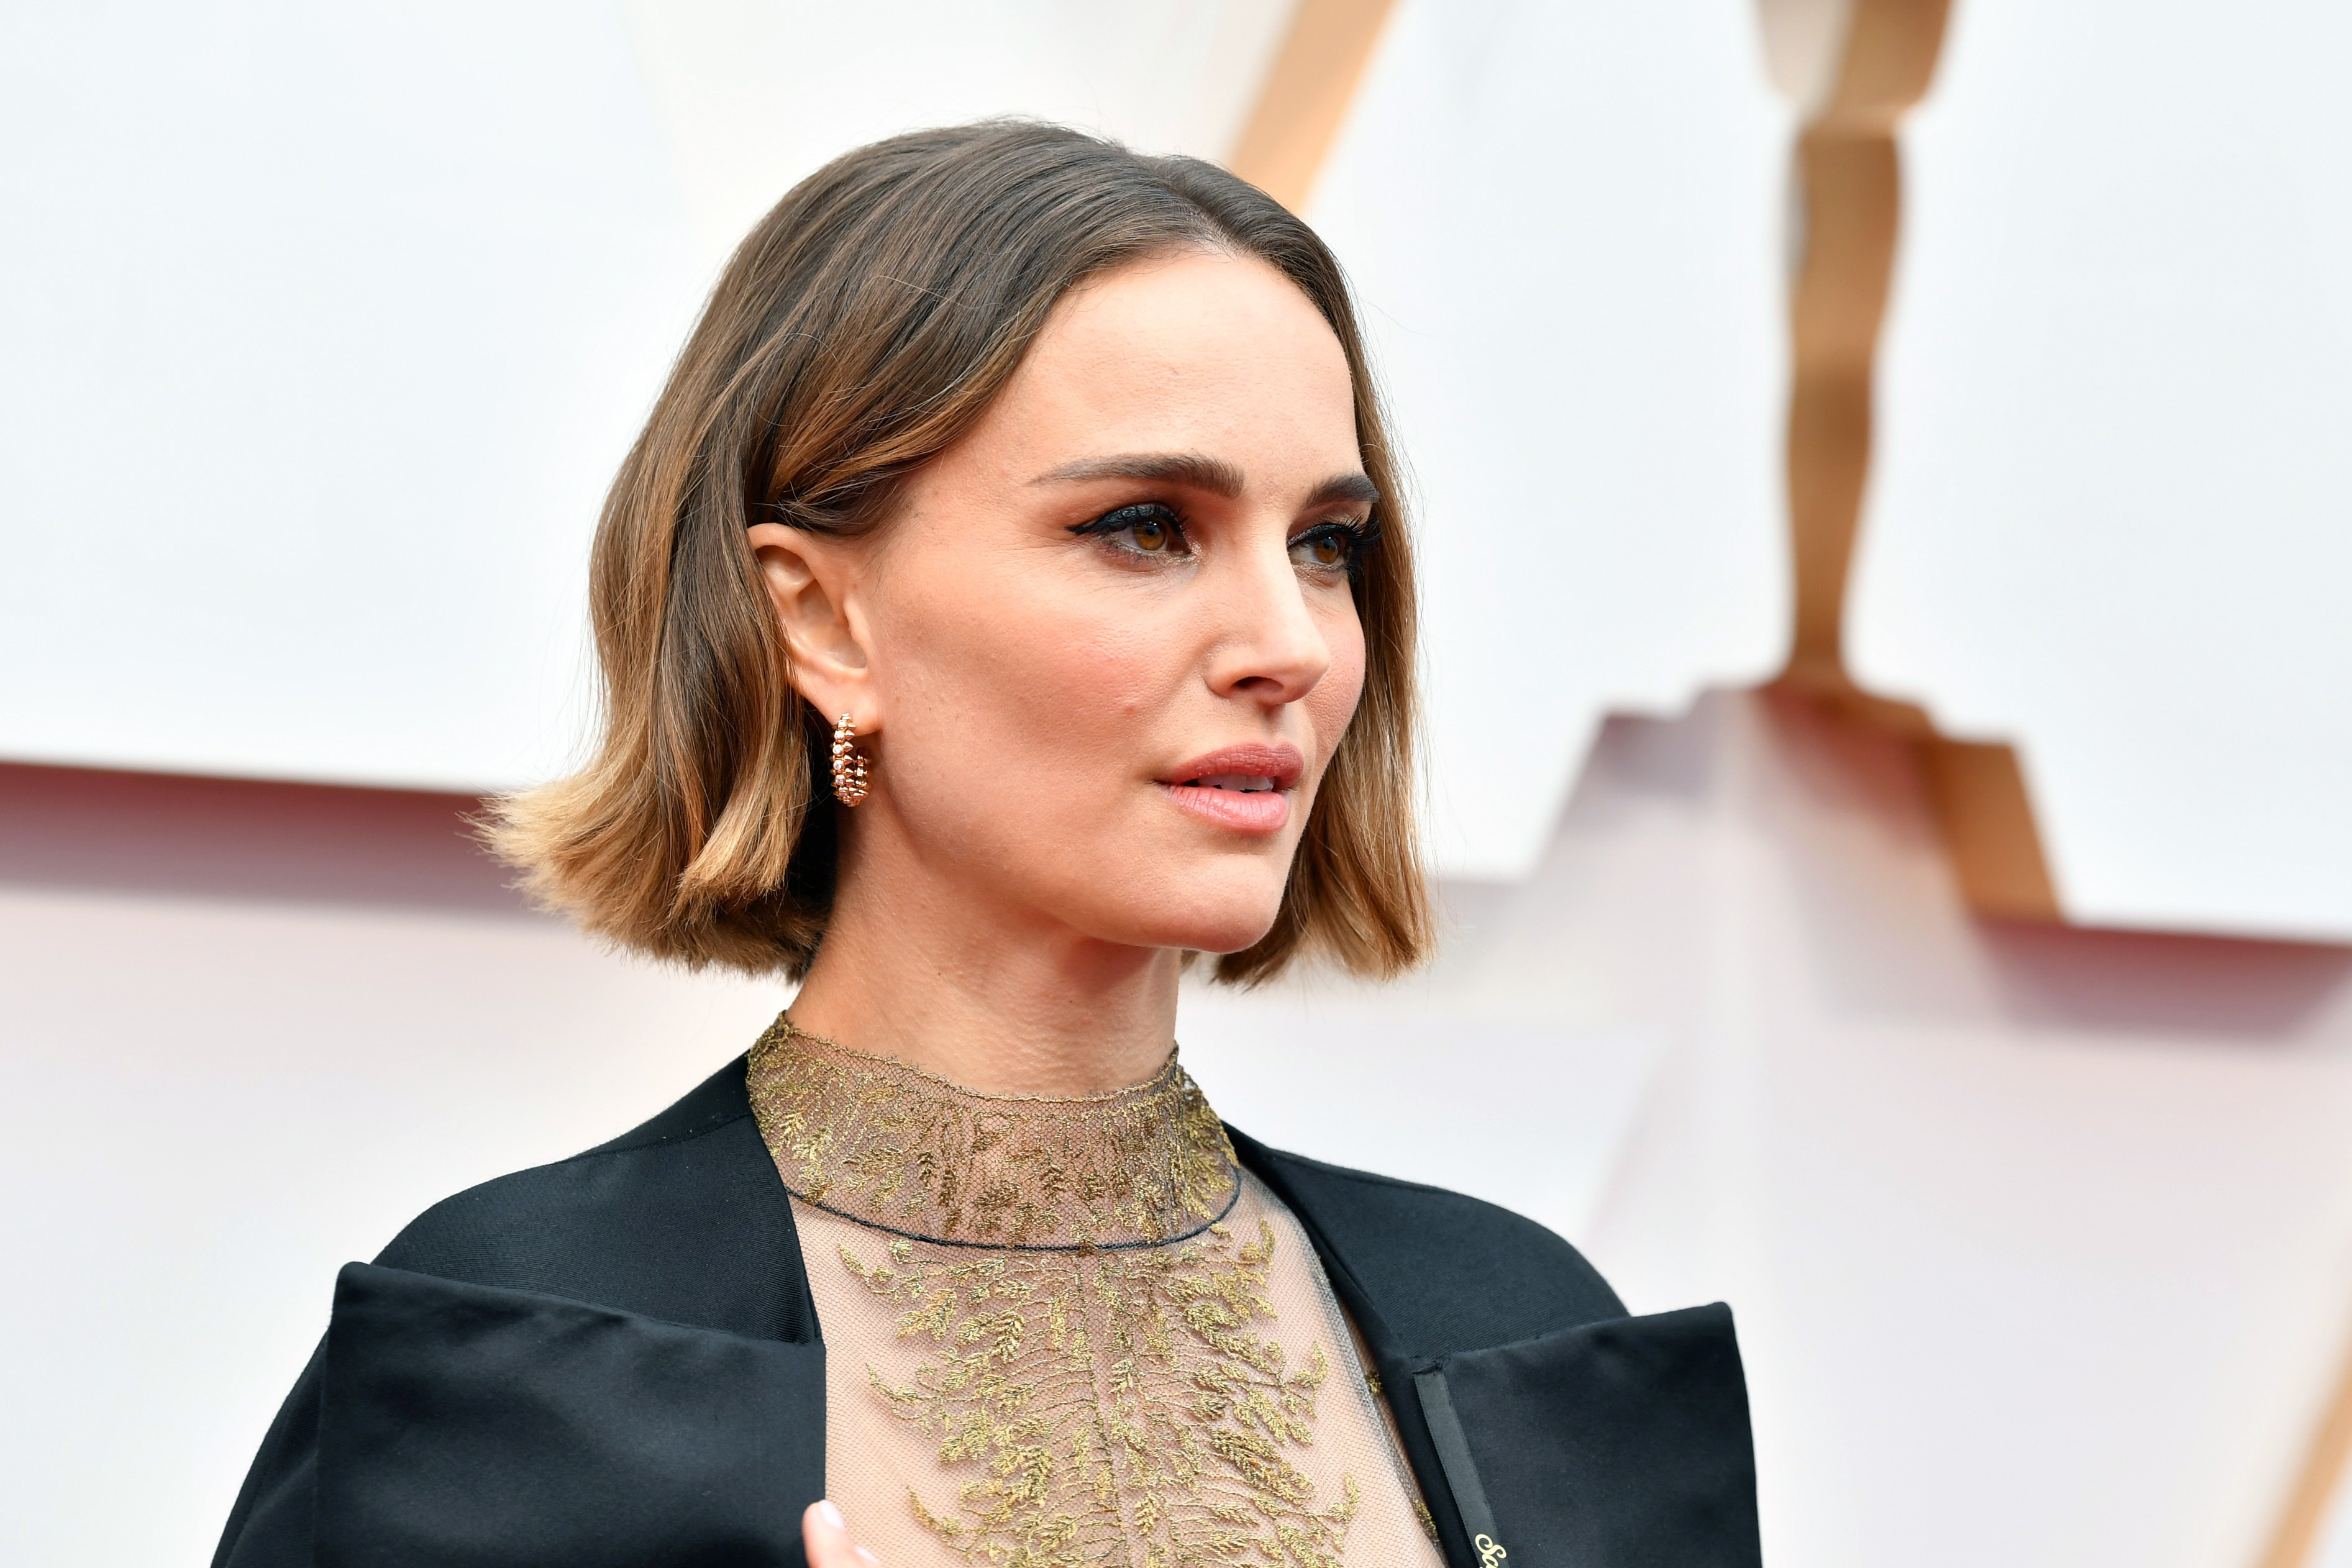 Natalie Portman On Being Sexualized As A Child Actor